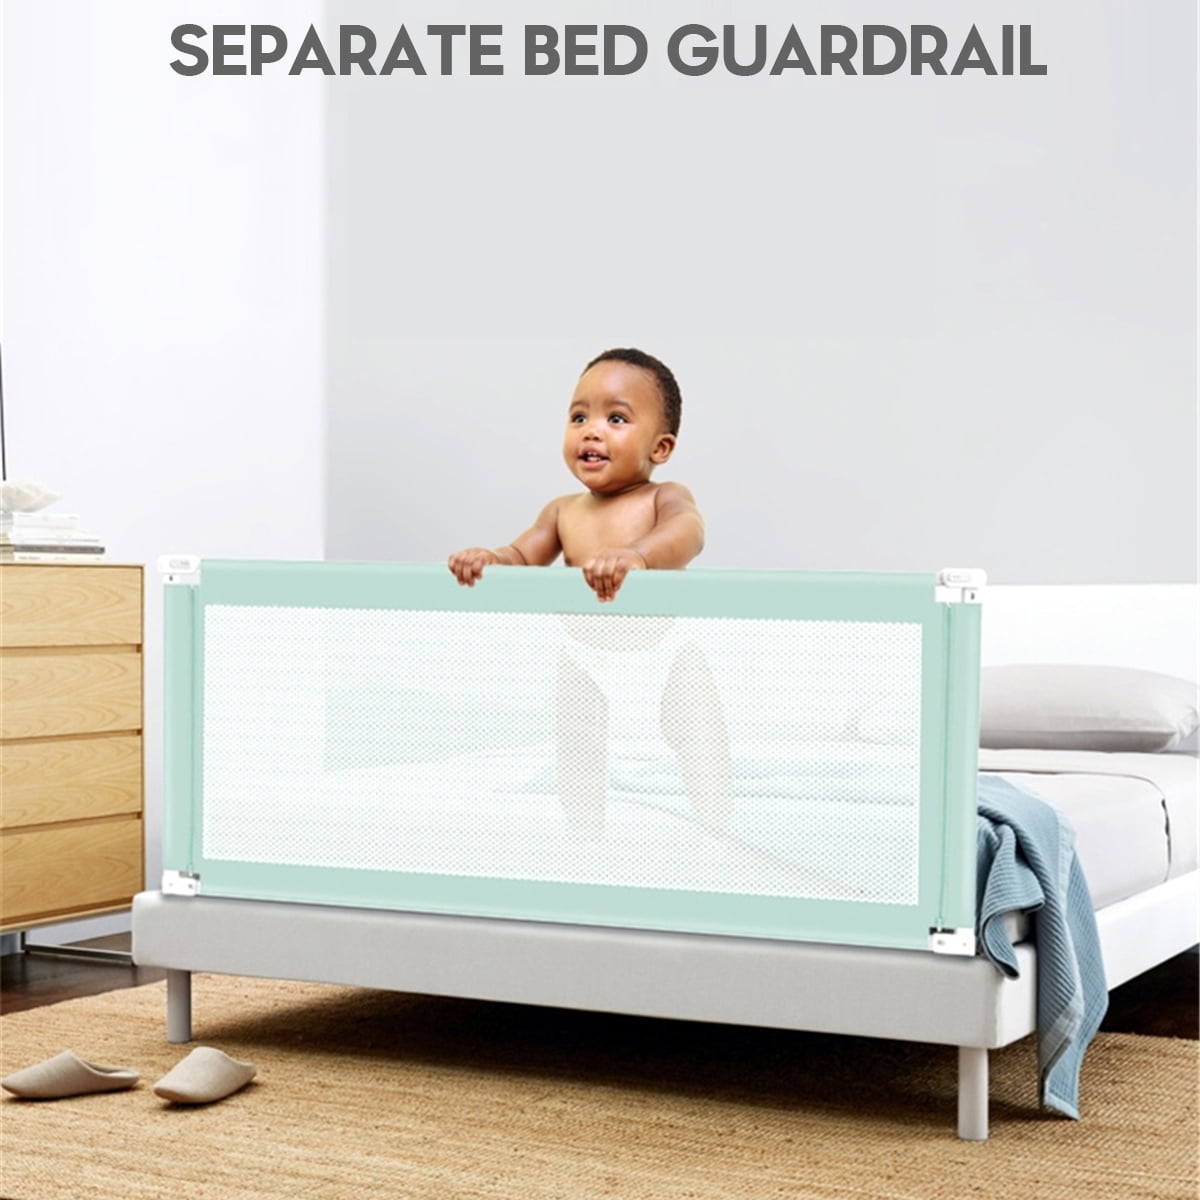 Bed Rails Toddler Bed Guard Toddlers Safety Guard for Kids Toddler Children Baby Twin Full Size Queen & King Mattress/Bed LQHZWYC Size : 61x150cm Double